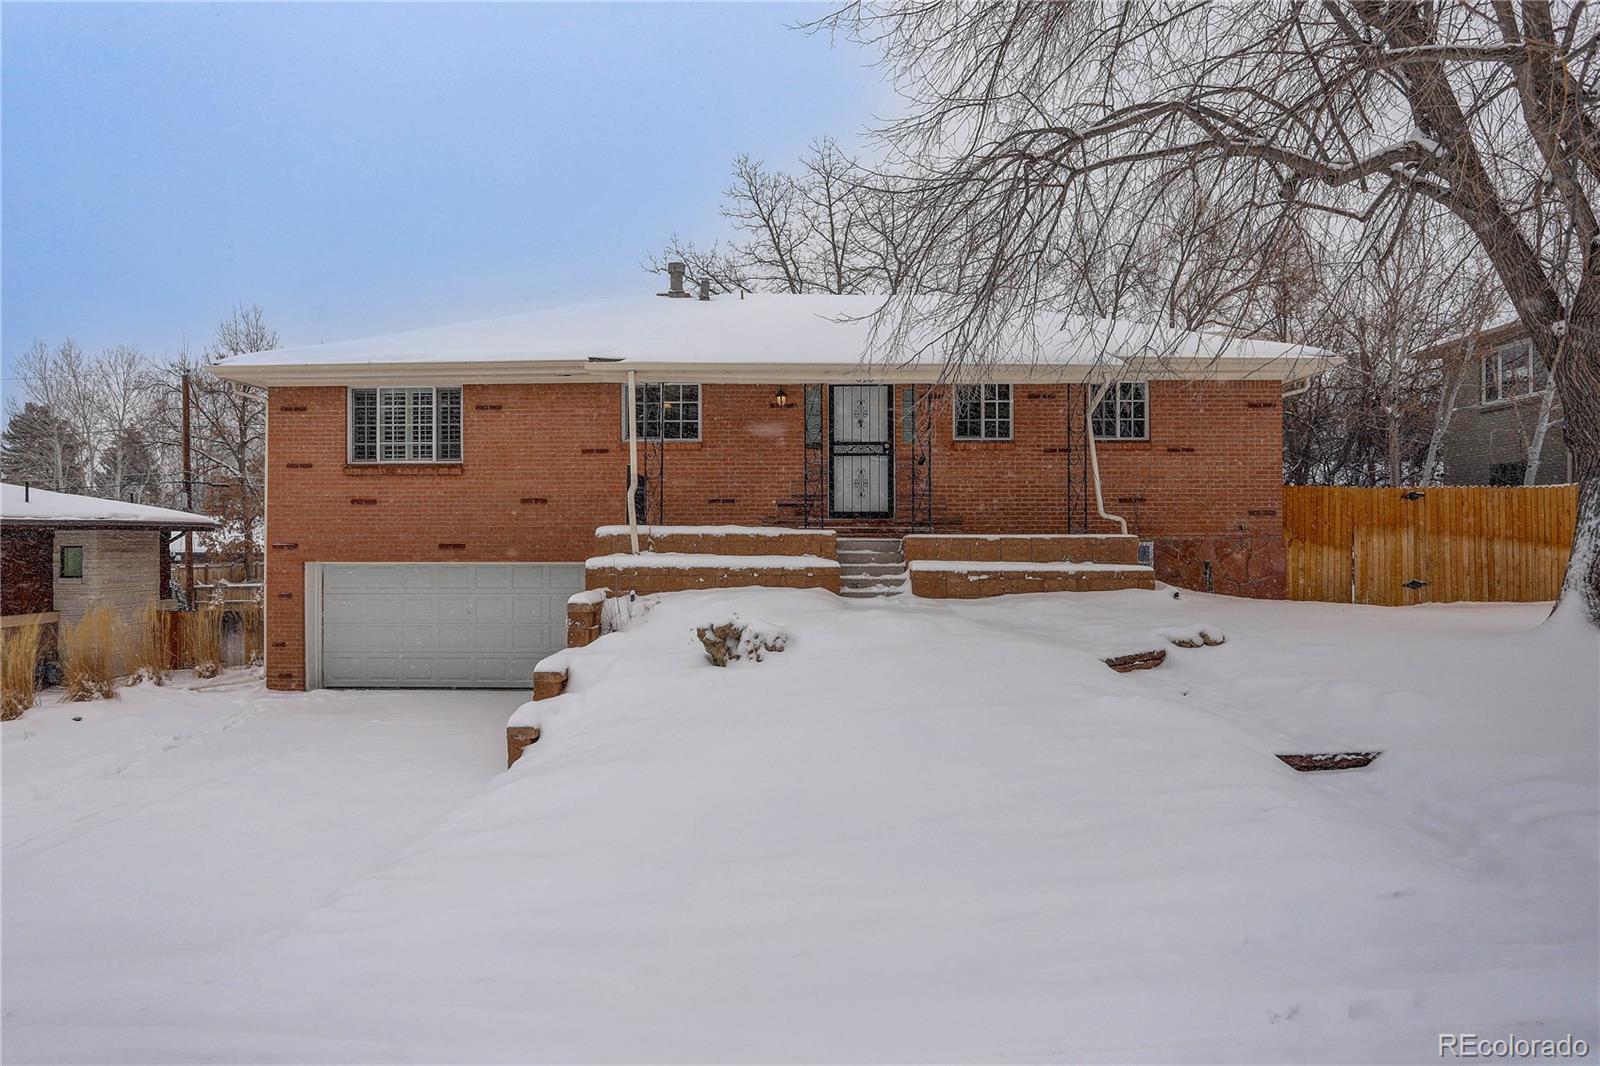 a front view of a house with yard covered in snow